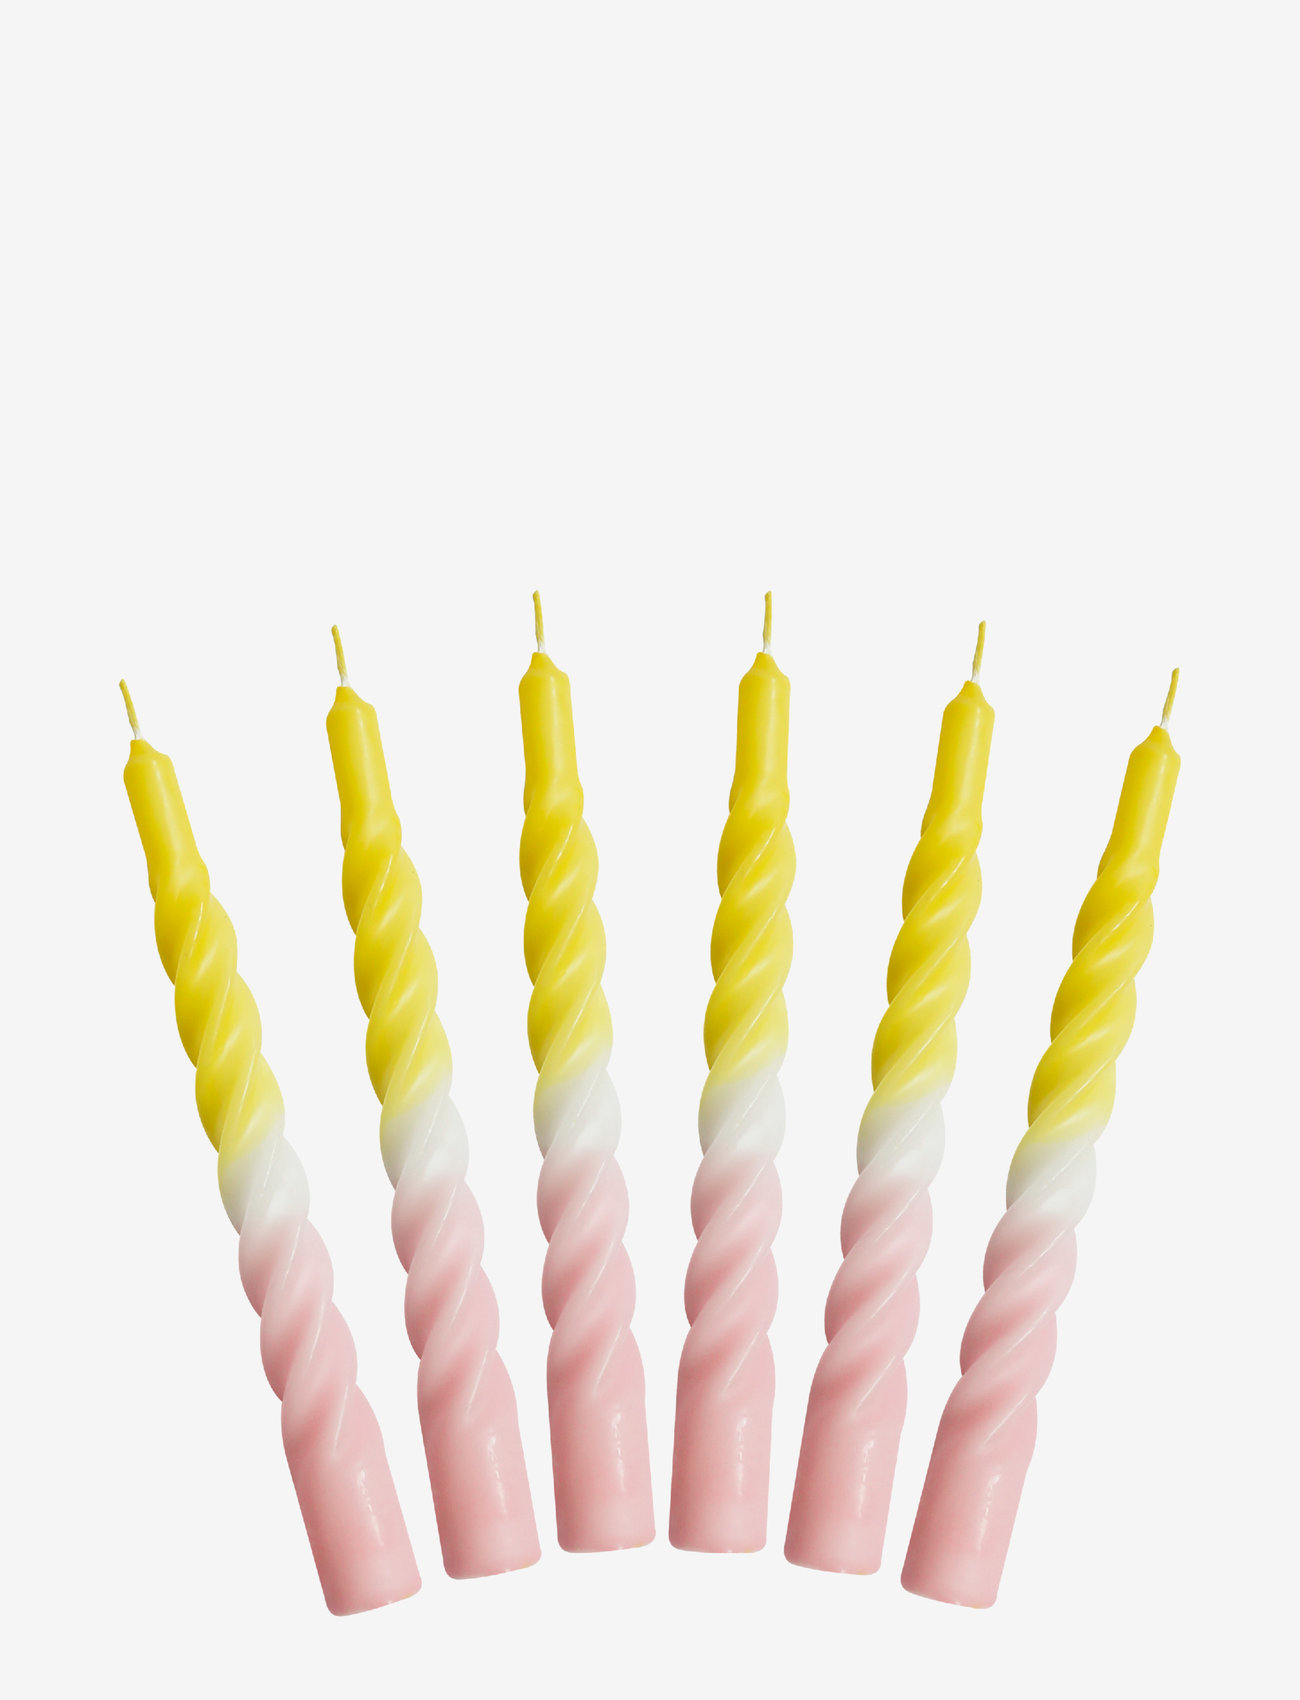 Kunstindustrien - Twisted Candles, 6 piece box, multi colored - de laveste prisene - yellow and pink with a white belt - 0